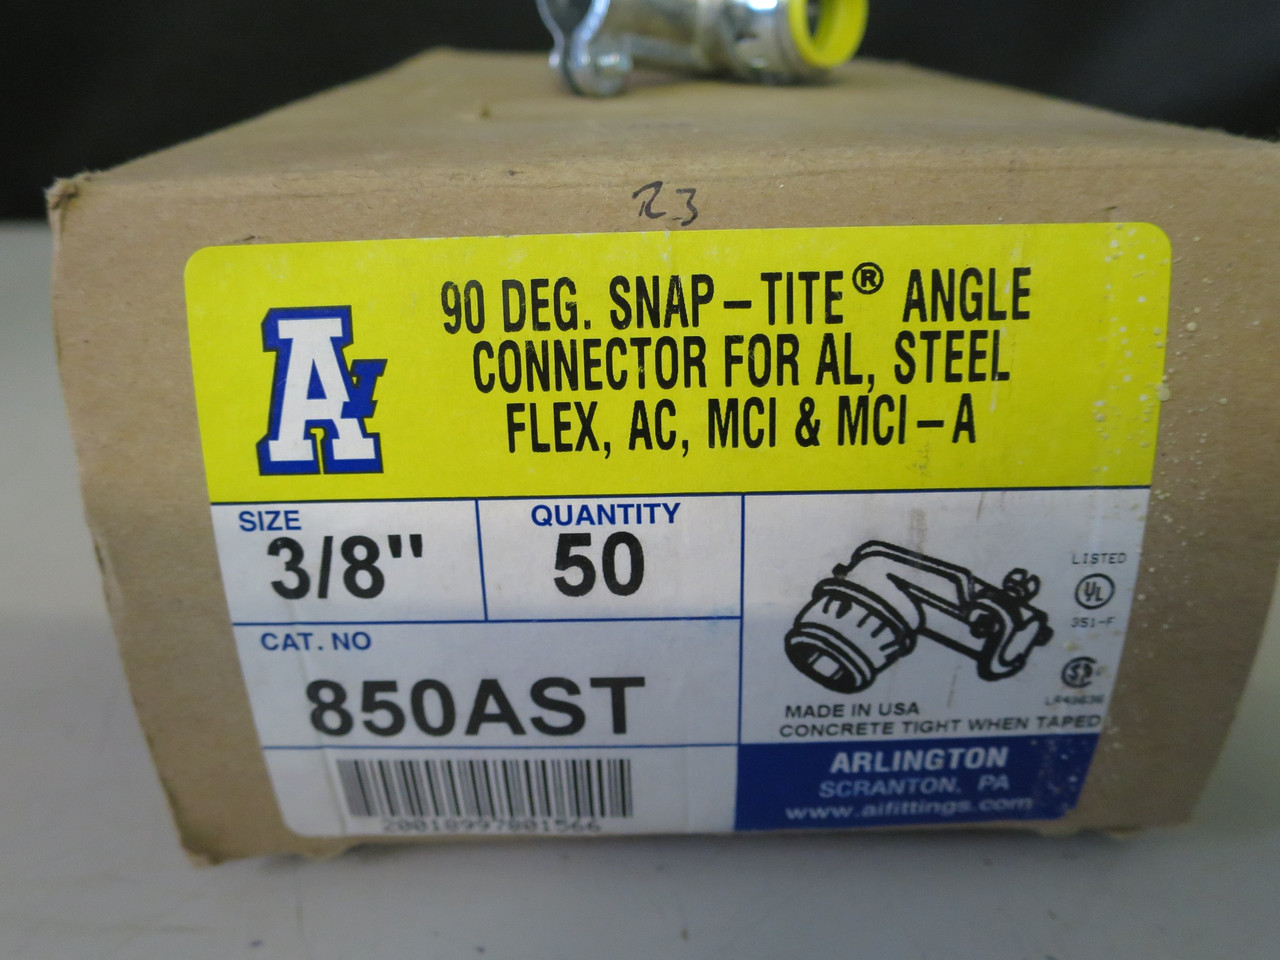 50ct. Snap-Tite 90 Degree Angle Connector All Steel Flex 3/8" Arlington 850AST